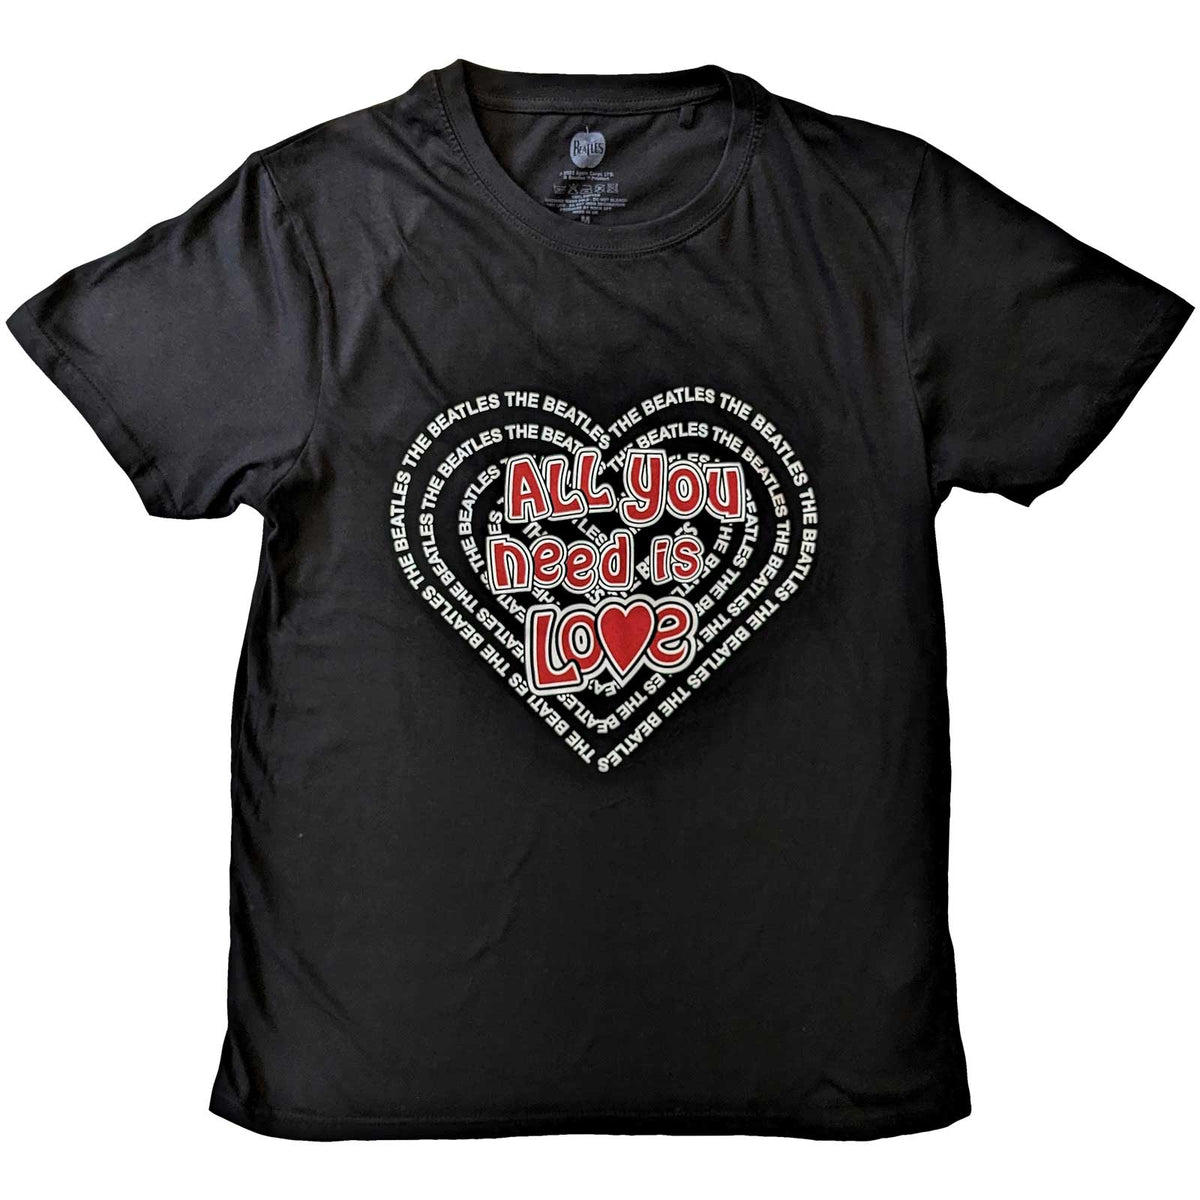 The Beatles T-Shirt - All You Need is Love Heart - Noir Unisexe Conception sous Licence Officielle